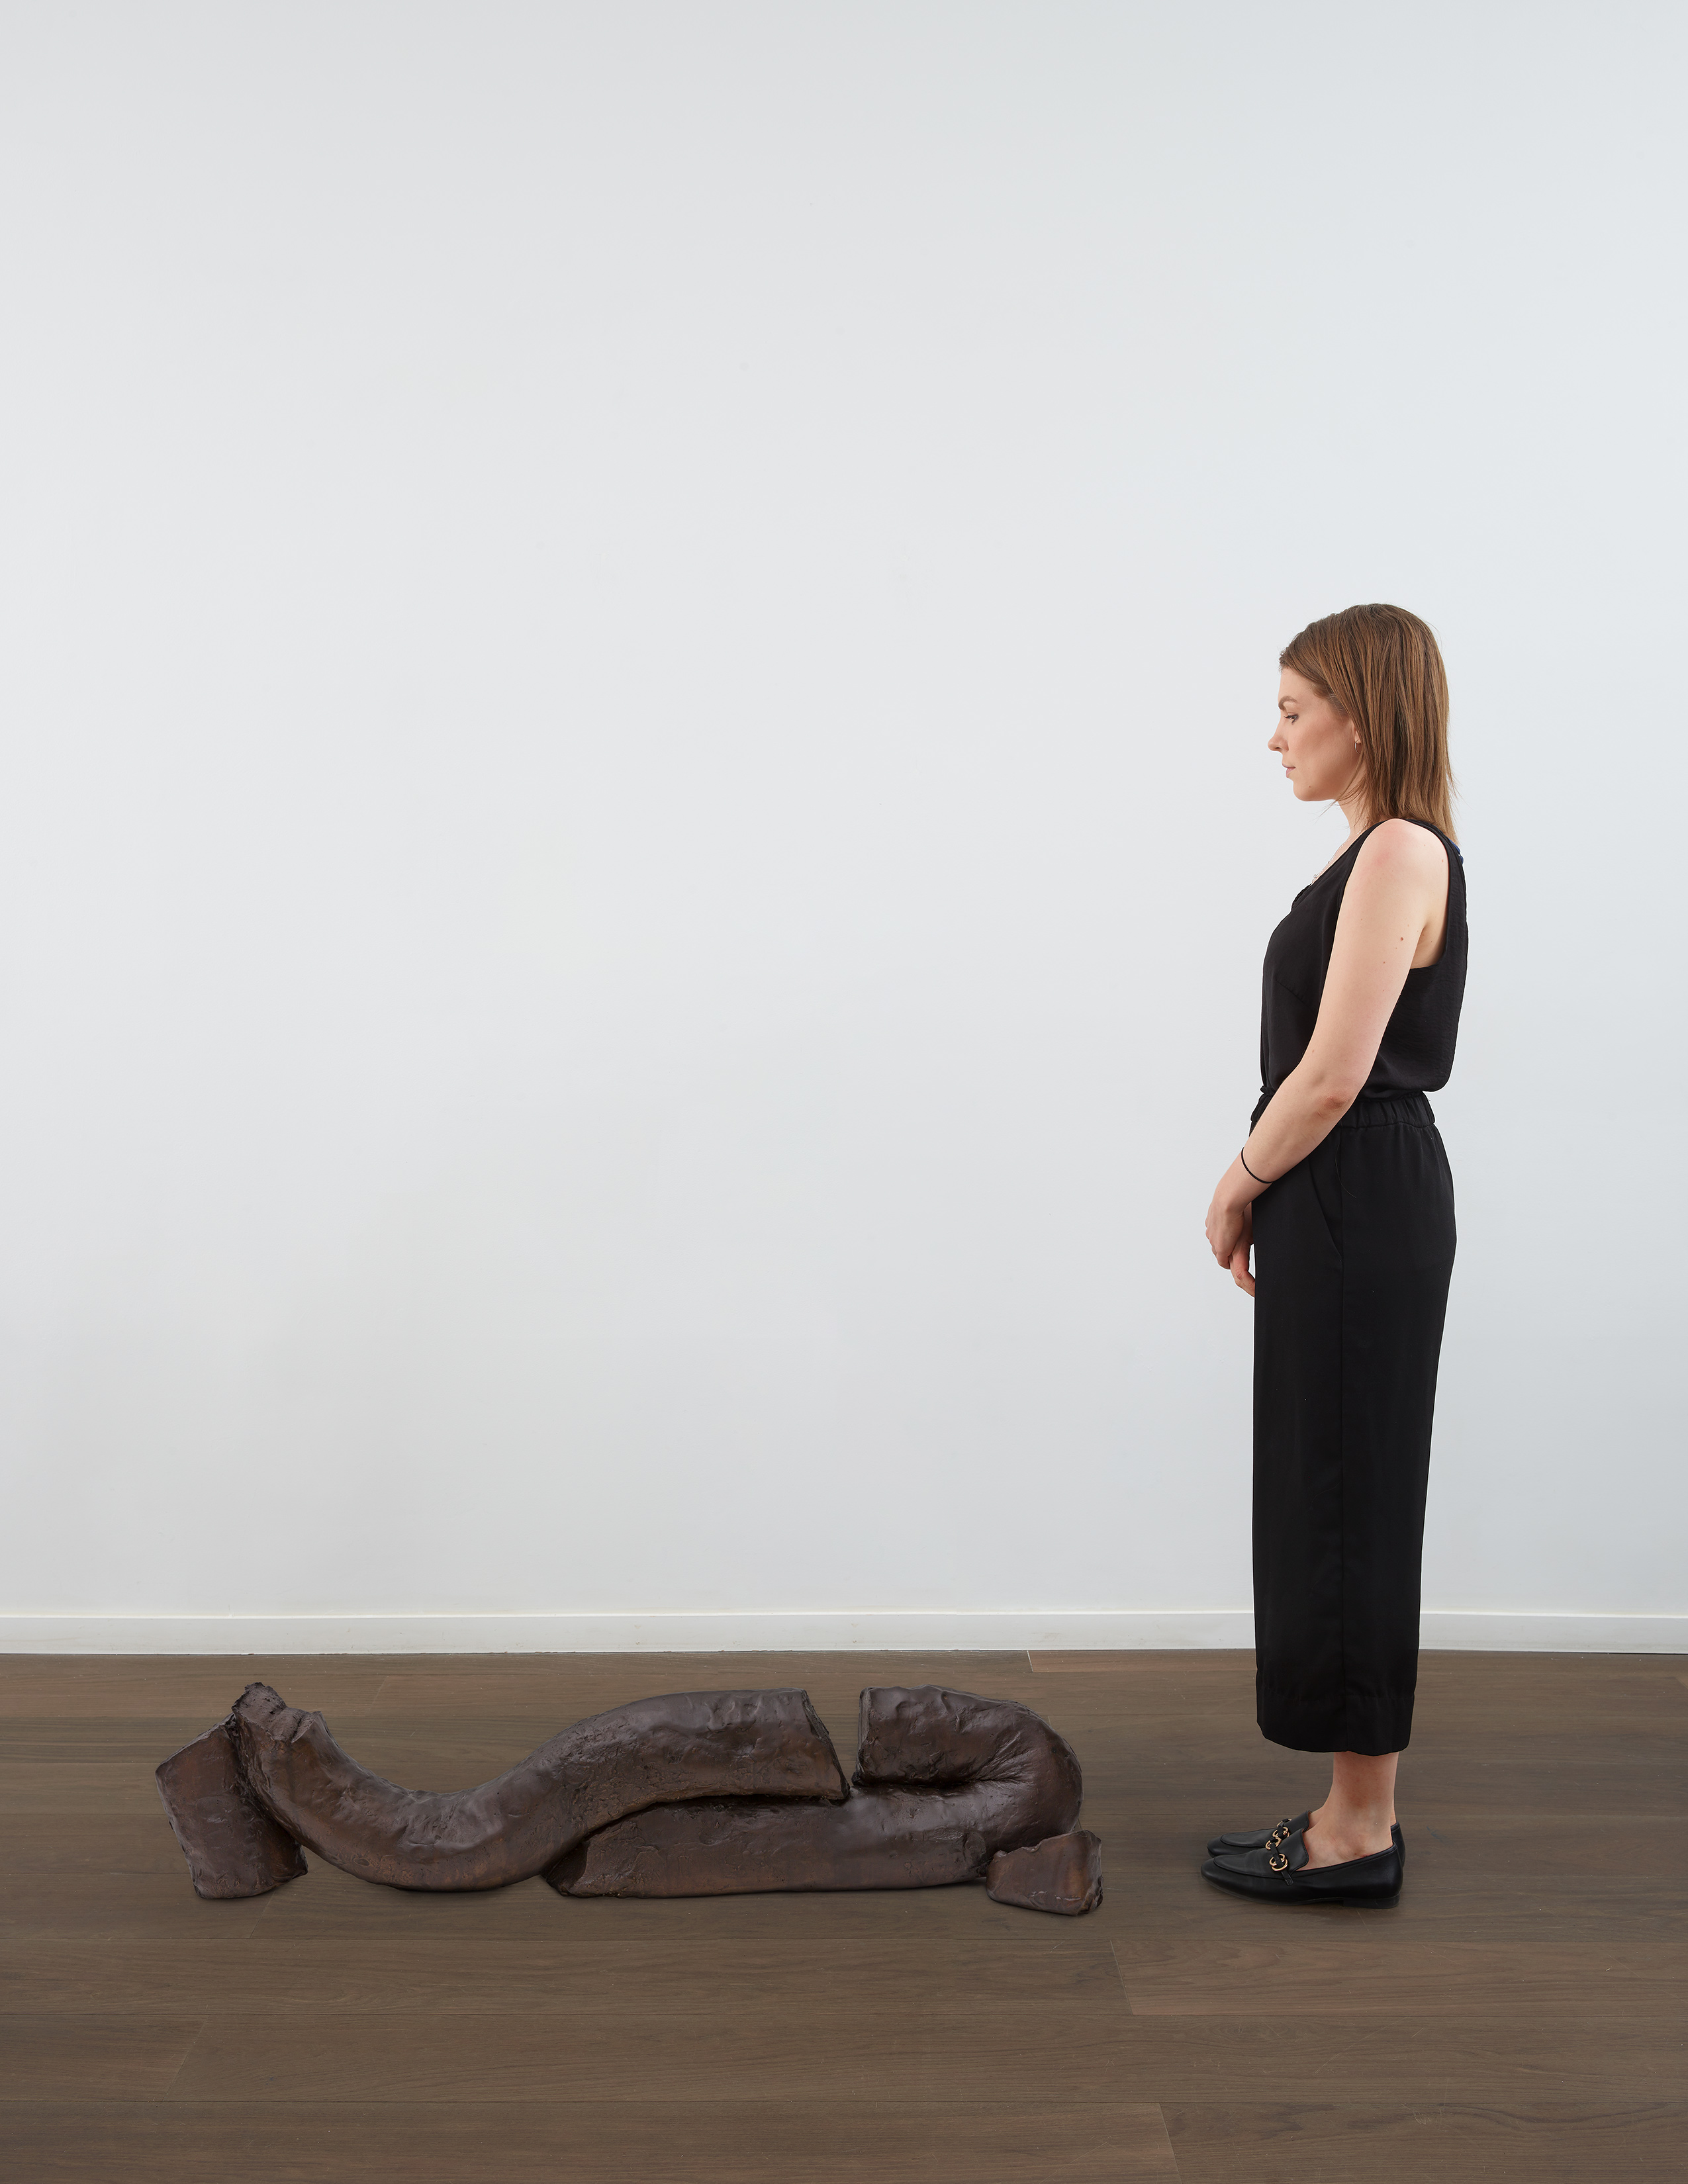 Scale view of Paulo Monteiro's Untitled sculpture